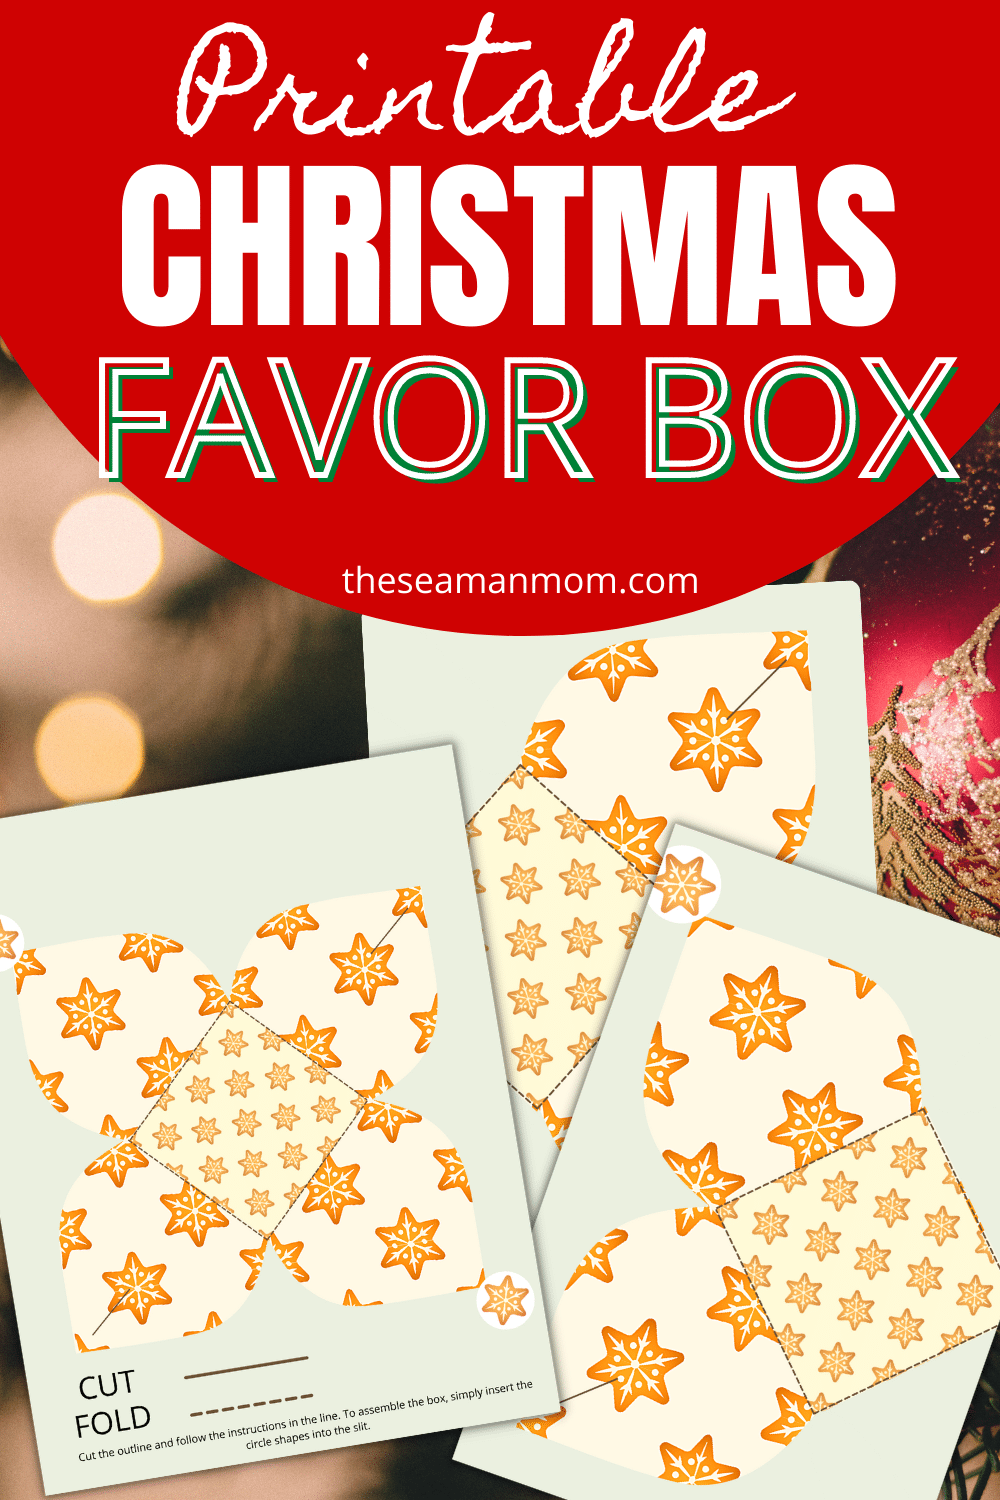 How to Make a Paper Box: Free Printable box template for Christmas favors and gifts